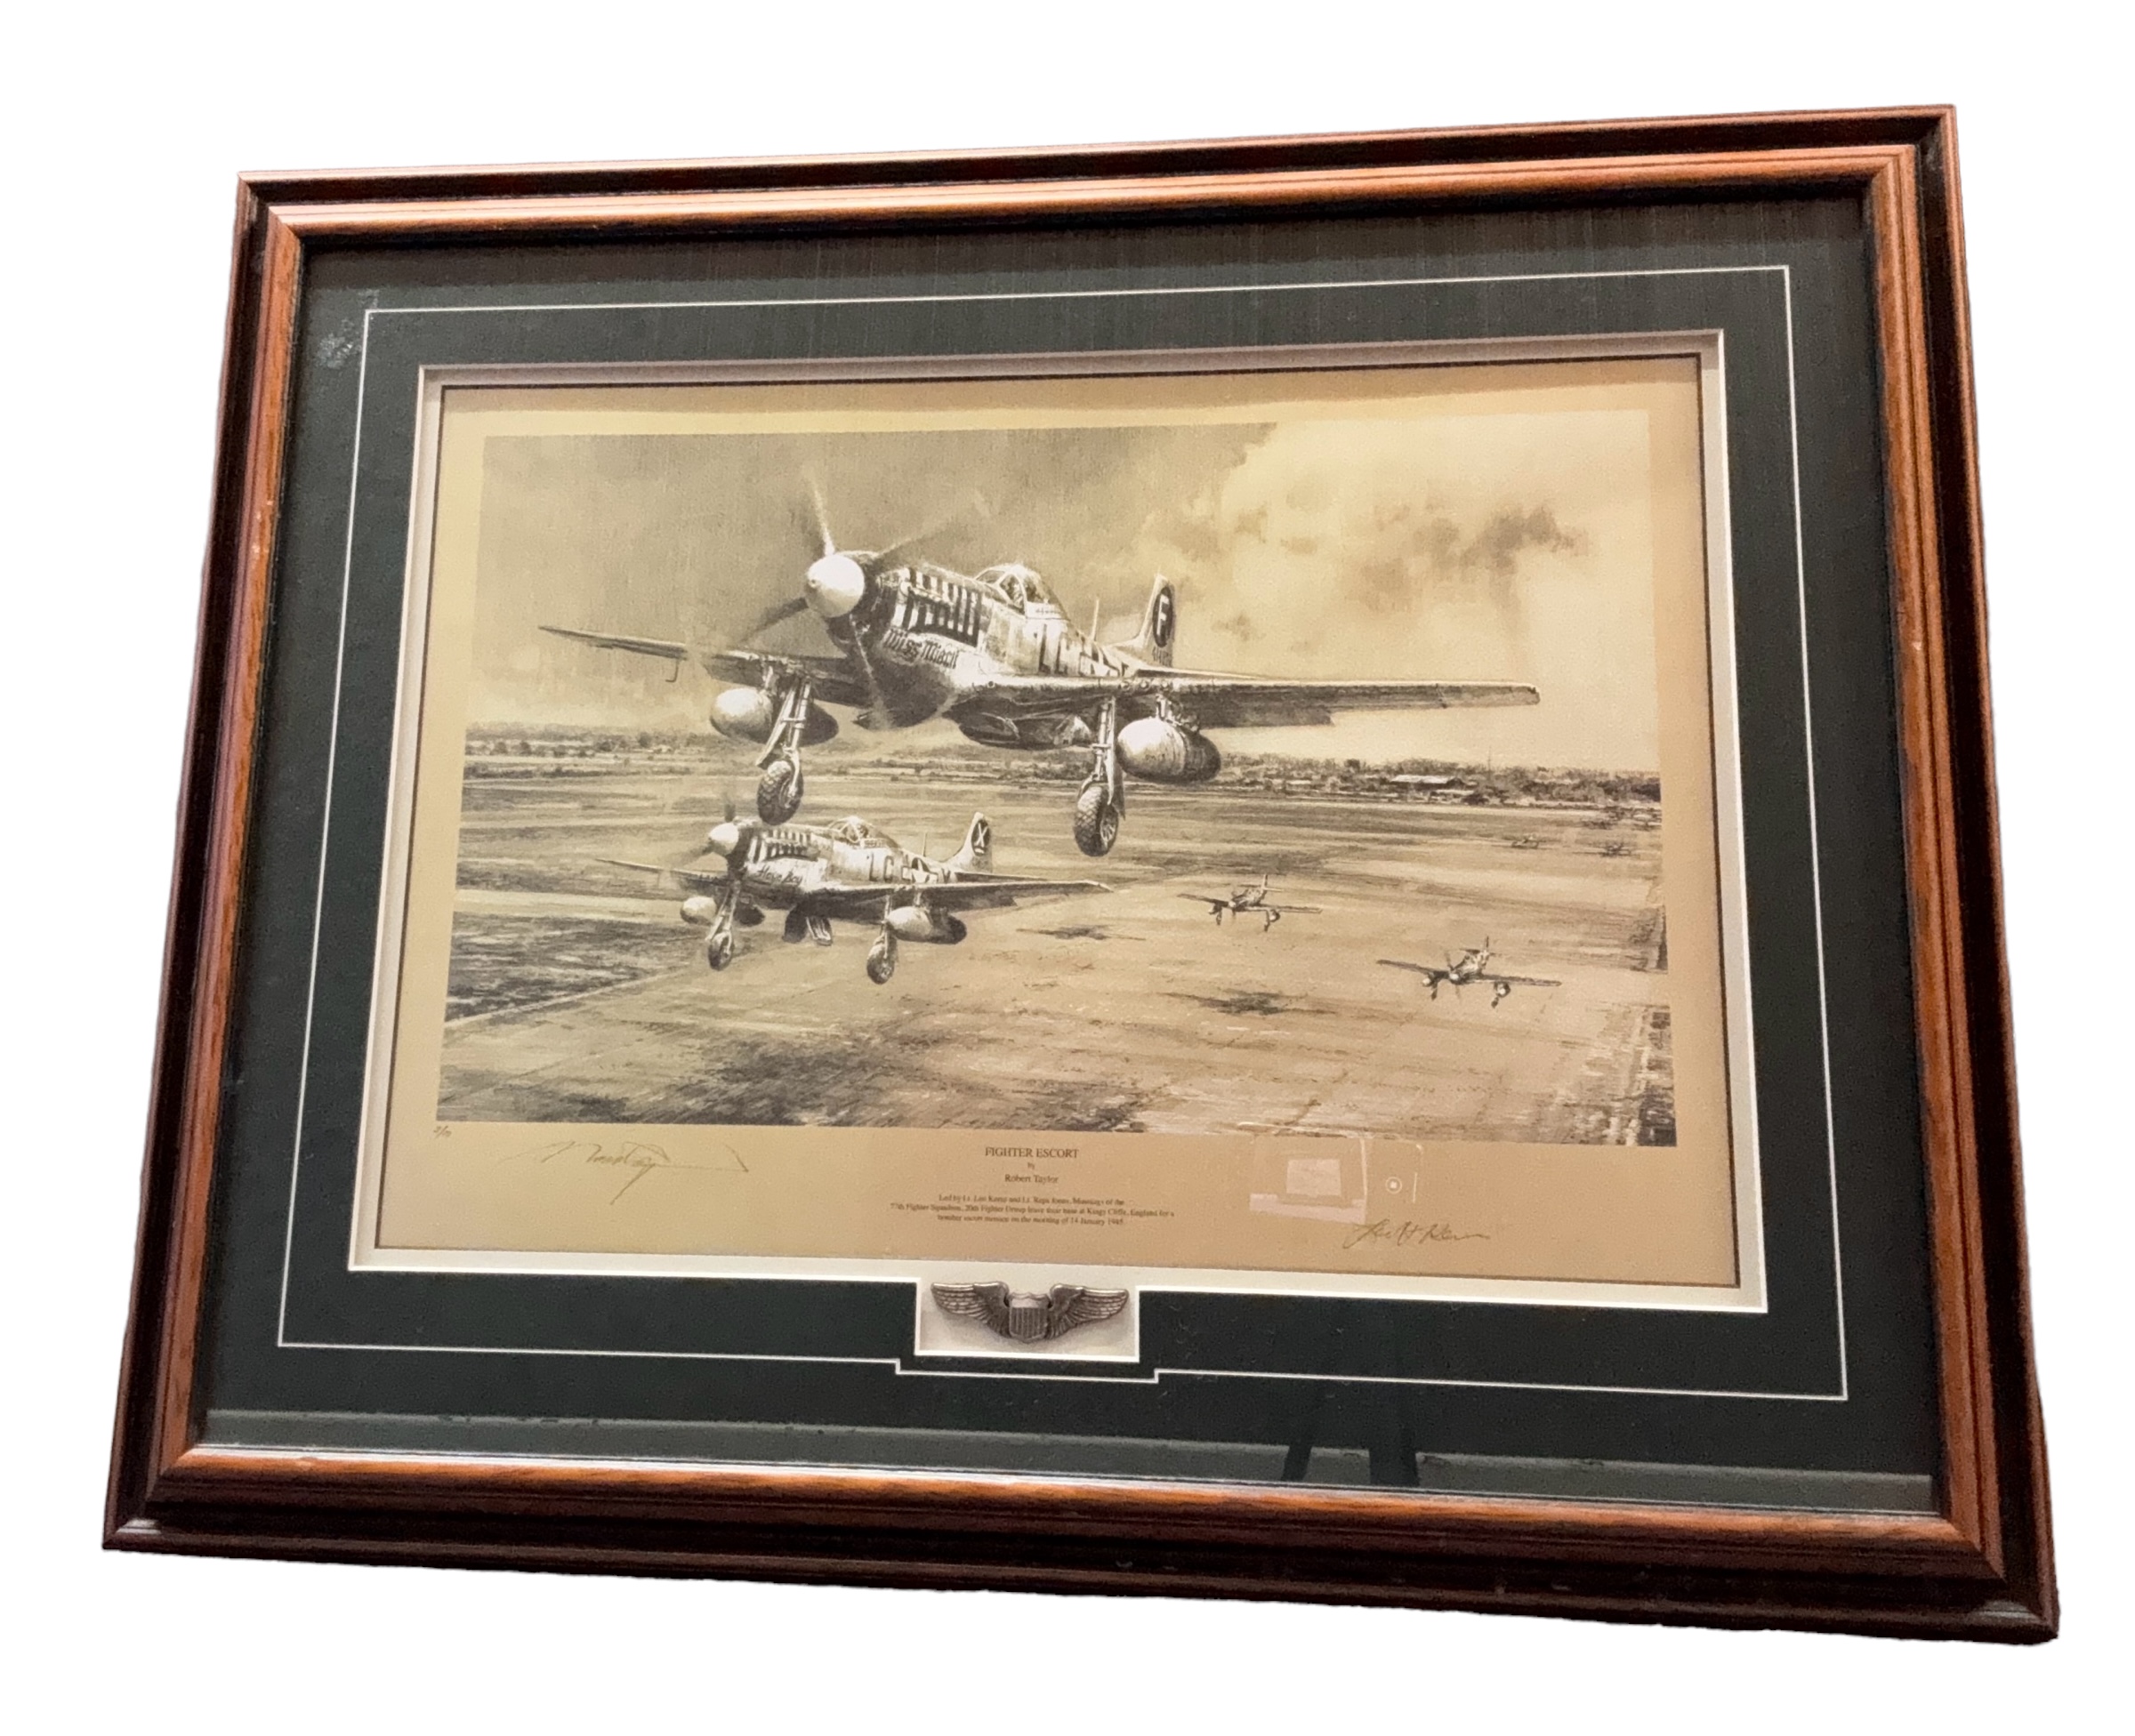 Fighter Escort WWII print 29x24 inch framed and mounted limited edition 3/10 signed in pencil by the